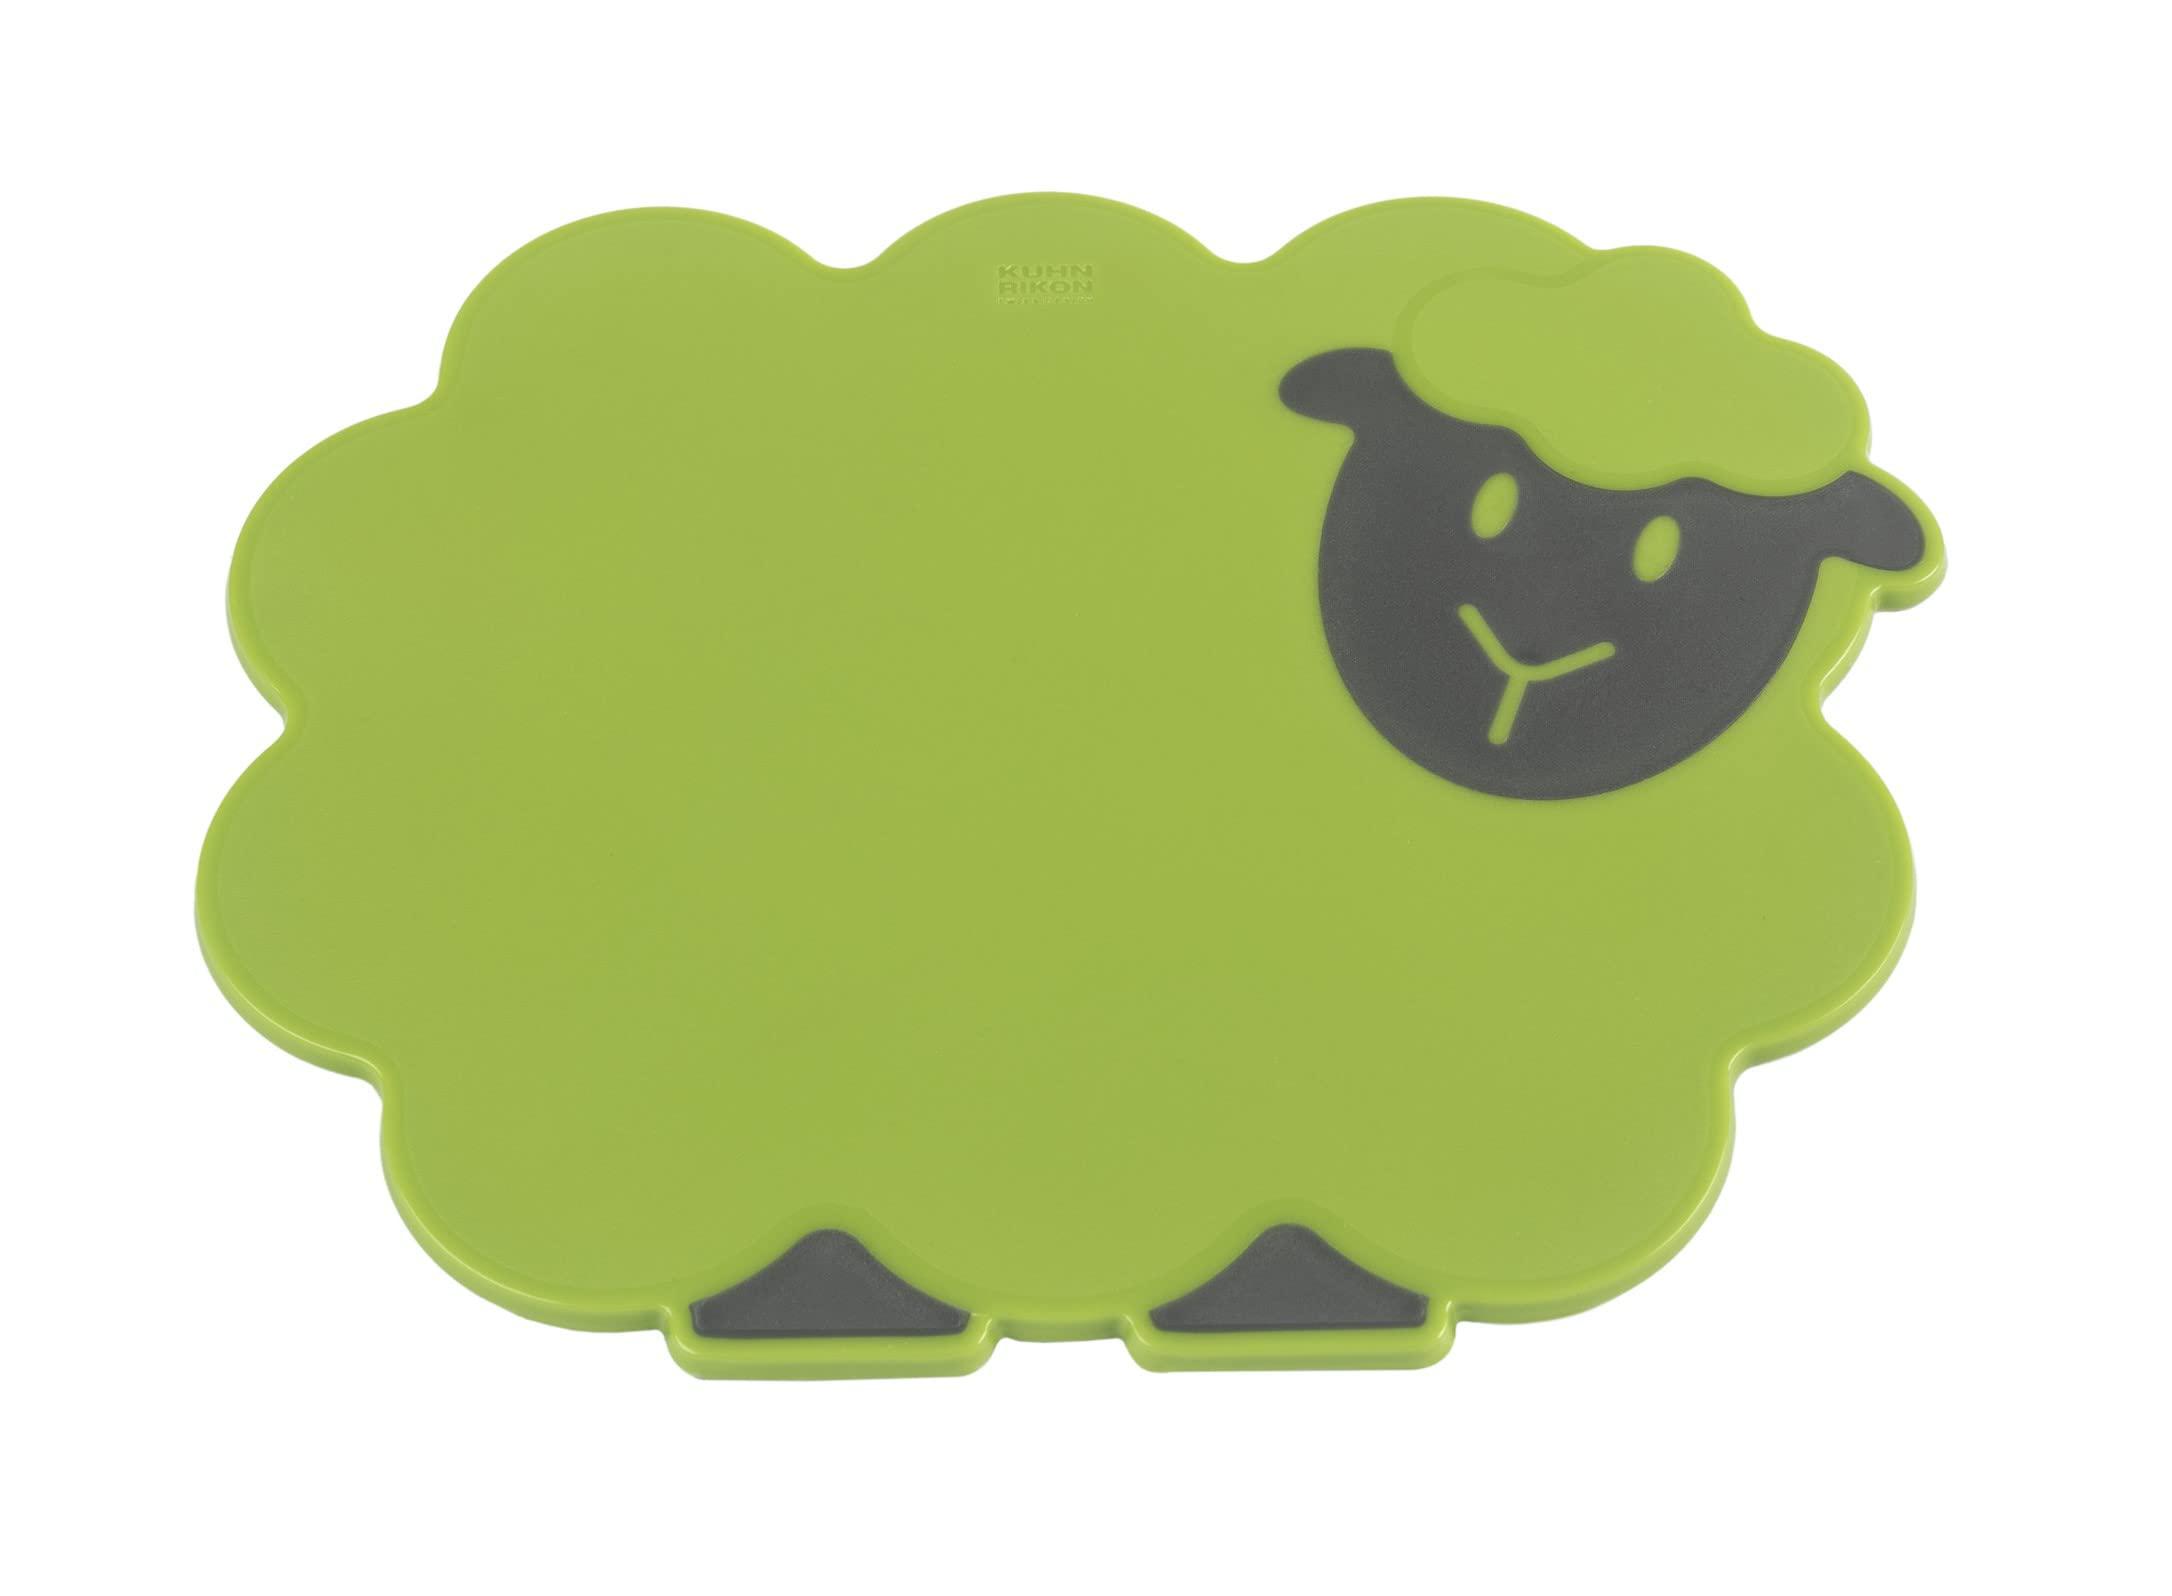 kuhn rikon kinderkitchen kids cutting board, sheep, 9.8" x 9.1" x 4.3", green | child-friendly kitchen tools for real cooking